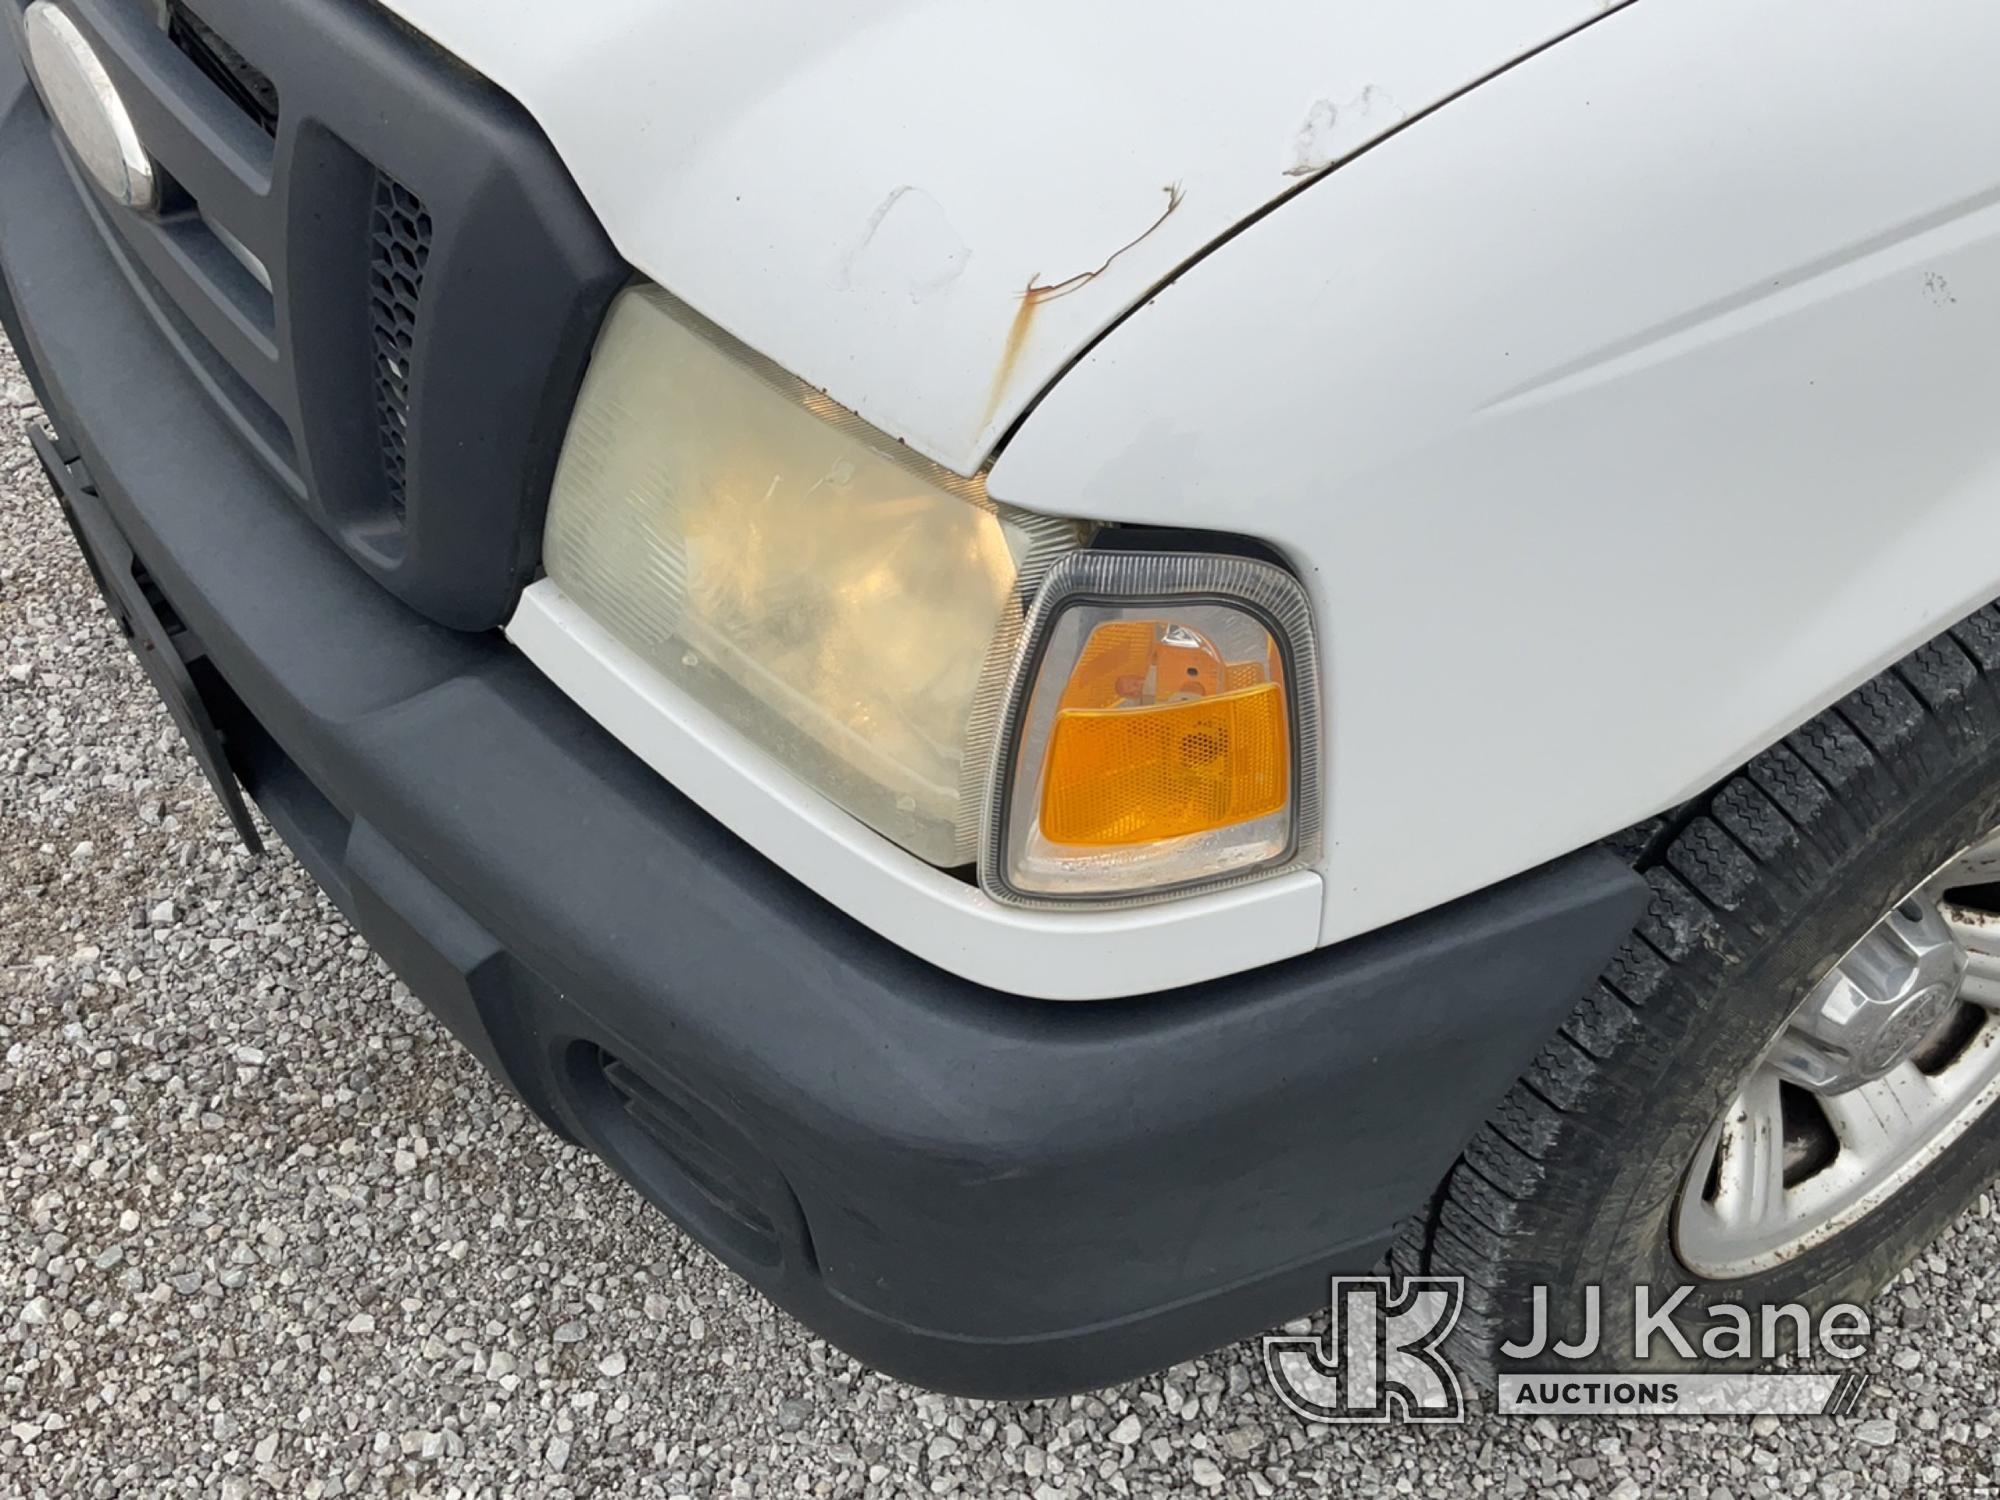 (Verona, KY) 2009 Ford Ranger 4x4 Extended-Cab Pickup Truck Runs & Moves) (Rust & Body Damage